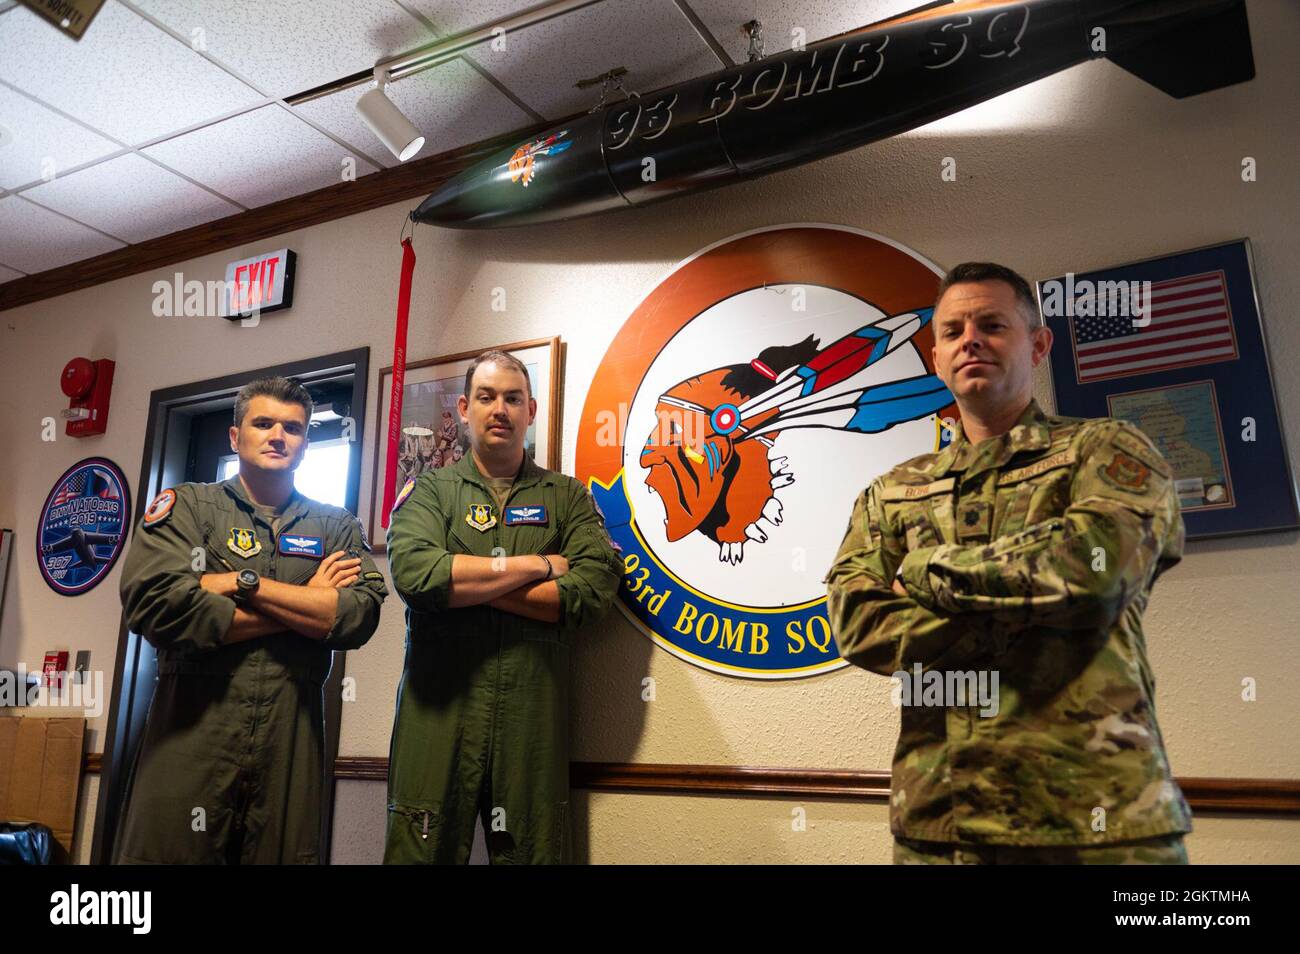 U.S. Air Force Maj. Austin Fouts, 93rd Bomb Squadron B-52 instructor pilot, Maj. Christopher Cousler, 93rd BS electronic warfare officer, and Lt. Col. Aaron Bohl, 307th Operational Support Squadron Director of Operations stand in front of the 93rd Bomb Squadron logo in the squadron heritage room at Barksdale Air Force Base, Louisiana, June 30, 2021. These officers are scheduled to compete on the 93rd Bomb Squadron team in the world’s premiere bomber competition, the Air Force Global Strike Challenge 2021. Stock Photo